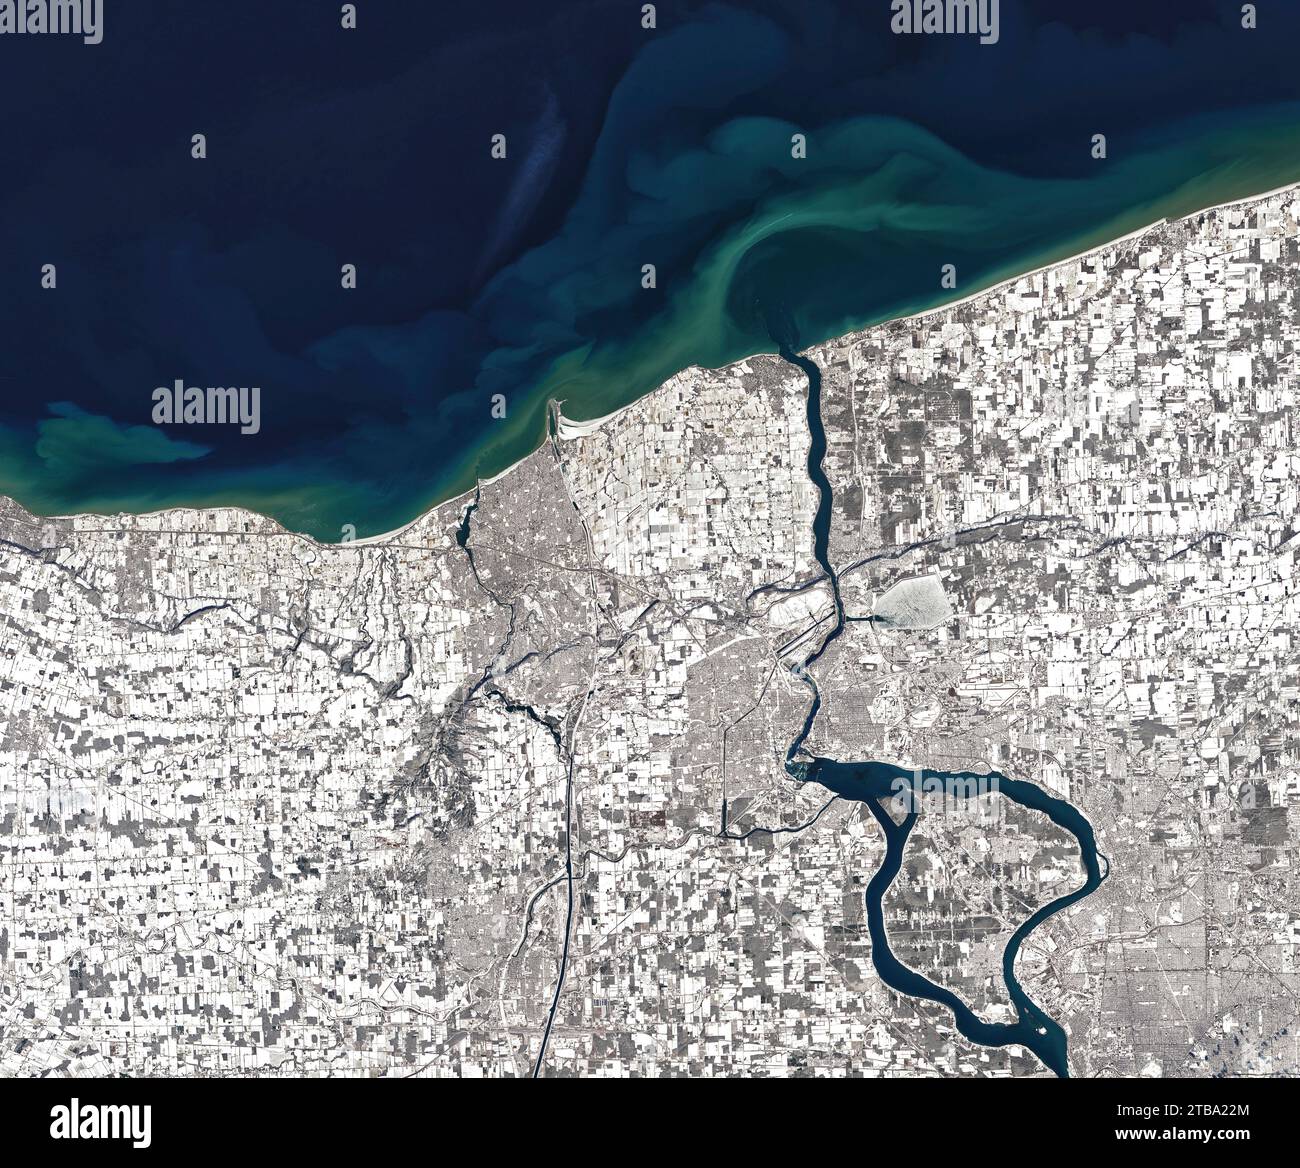 Satellite image showing the snow-covered landscape around the Niagara River. Stock Photo